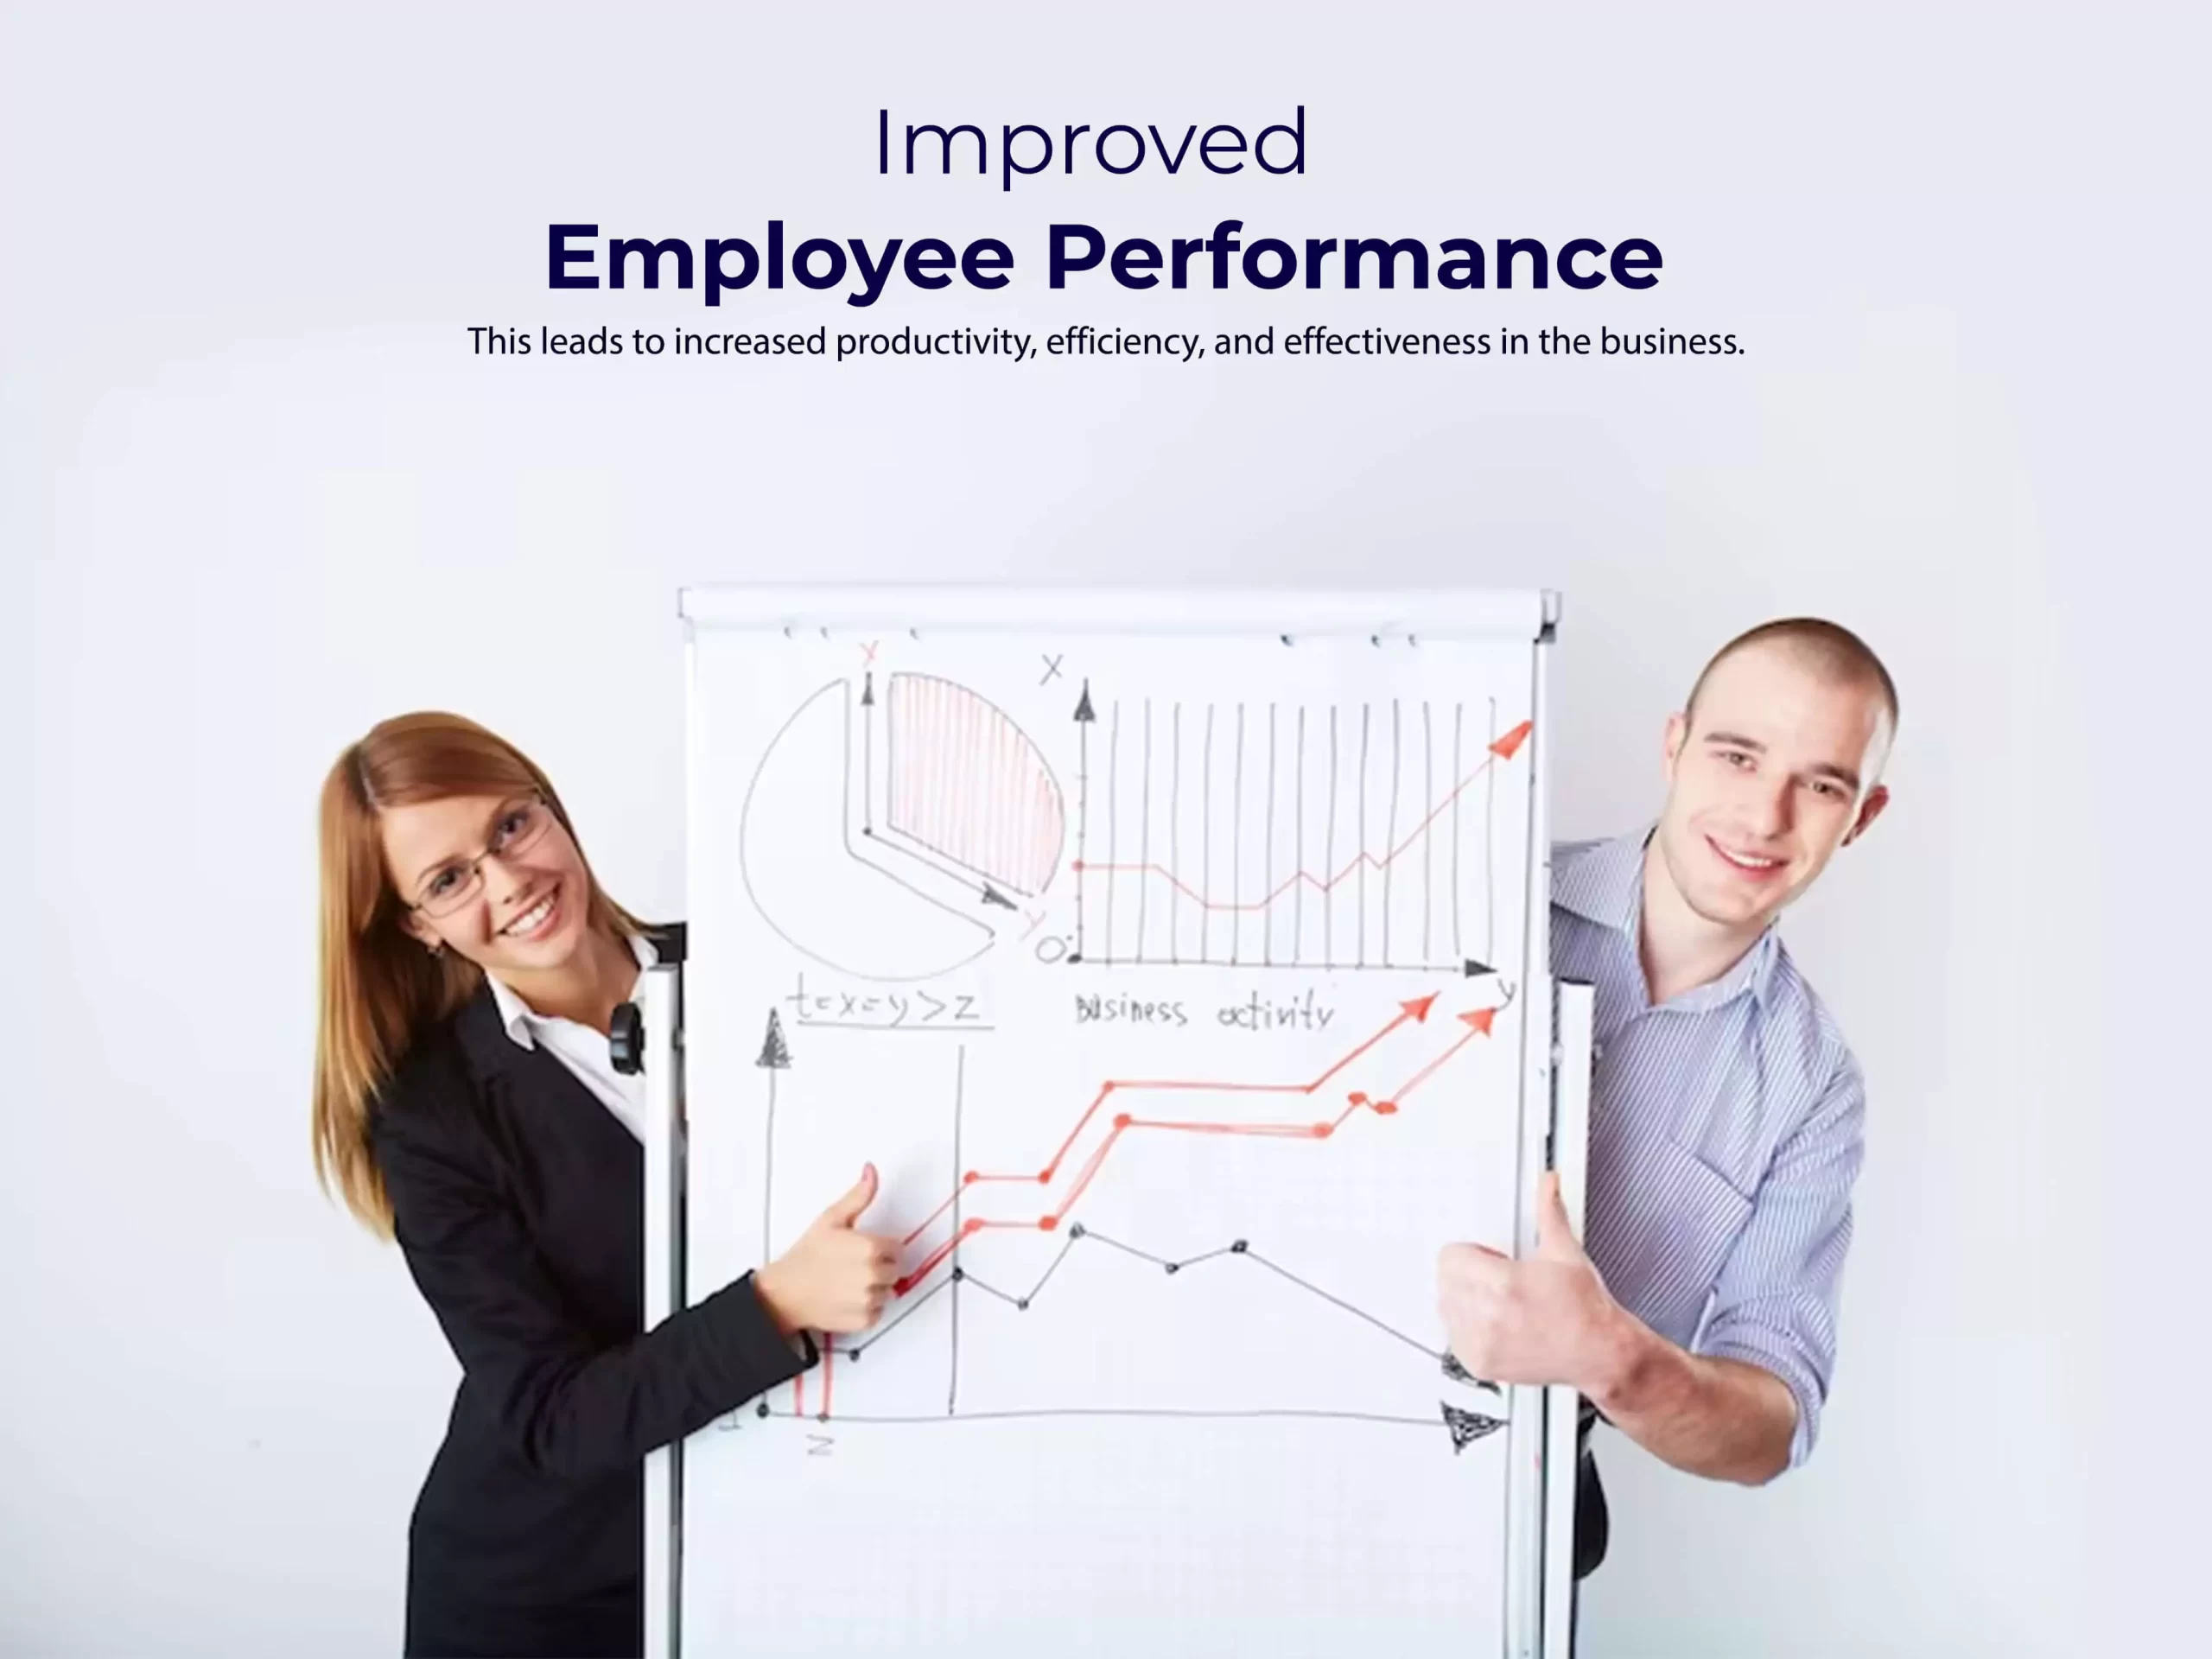 Improved employee performance